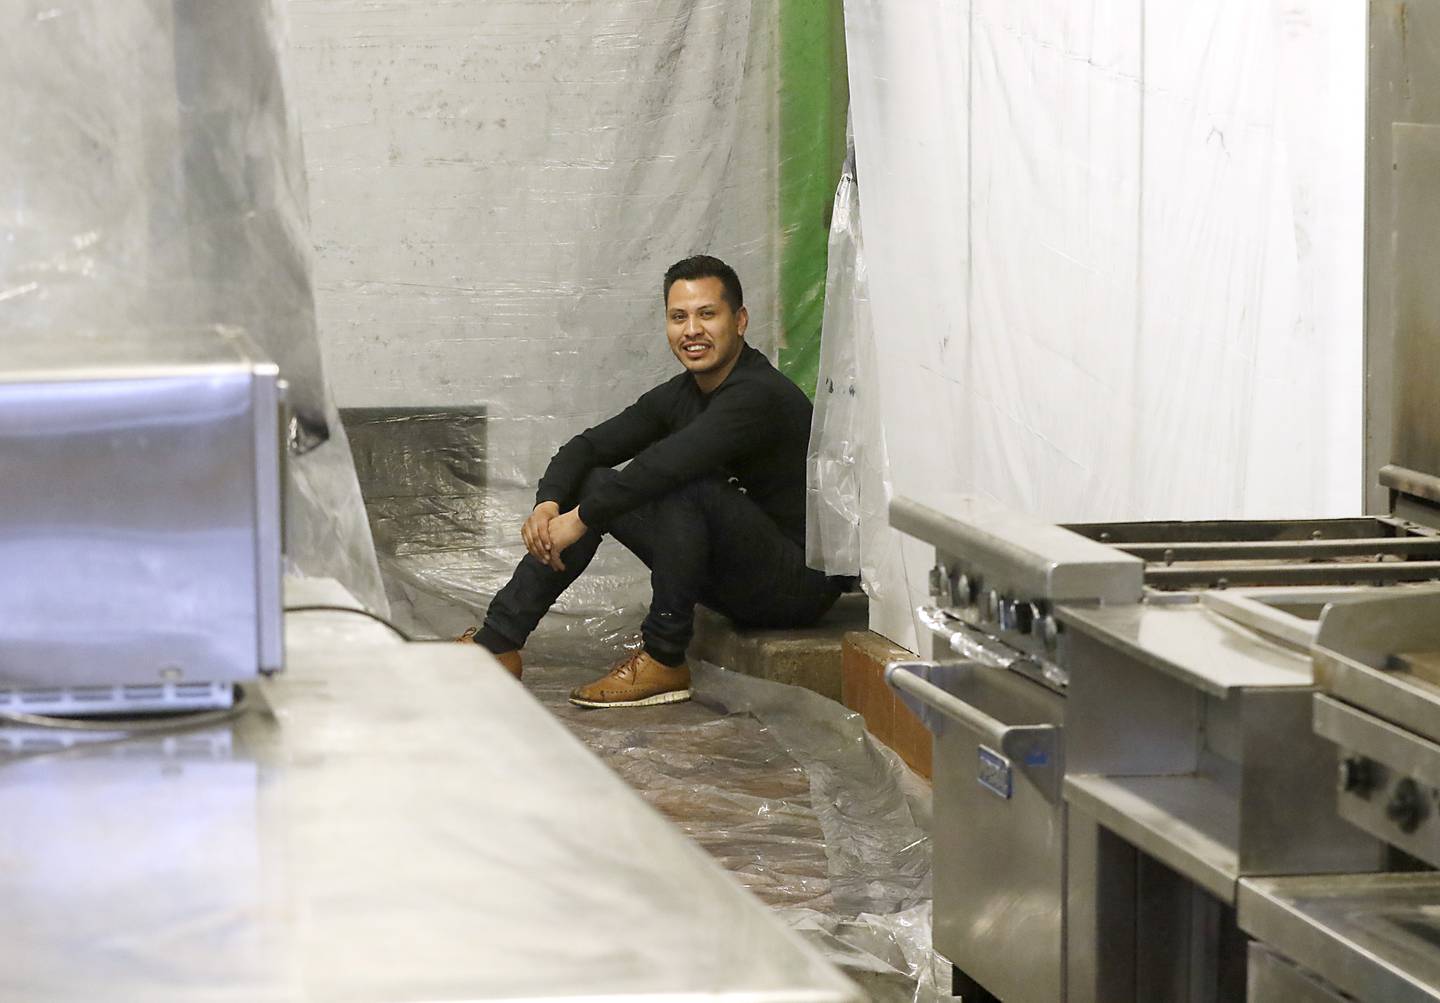 Raul Briseno Jr., the son of the late Raul Briseno Sr., sits Tuesday, Feb. 22, 2022, where he used to watch his dad prepare food when he was a child. Raul Briseno Jr. is opening up his own restaurant with is sister, Alexandra Strohmaier, in the original location where his dad opened up his first Raul’s Burrito Express in Wauconda. It has been 21 years since his father was murdered at the Burrito Express he owned in McHenry.